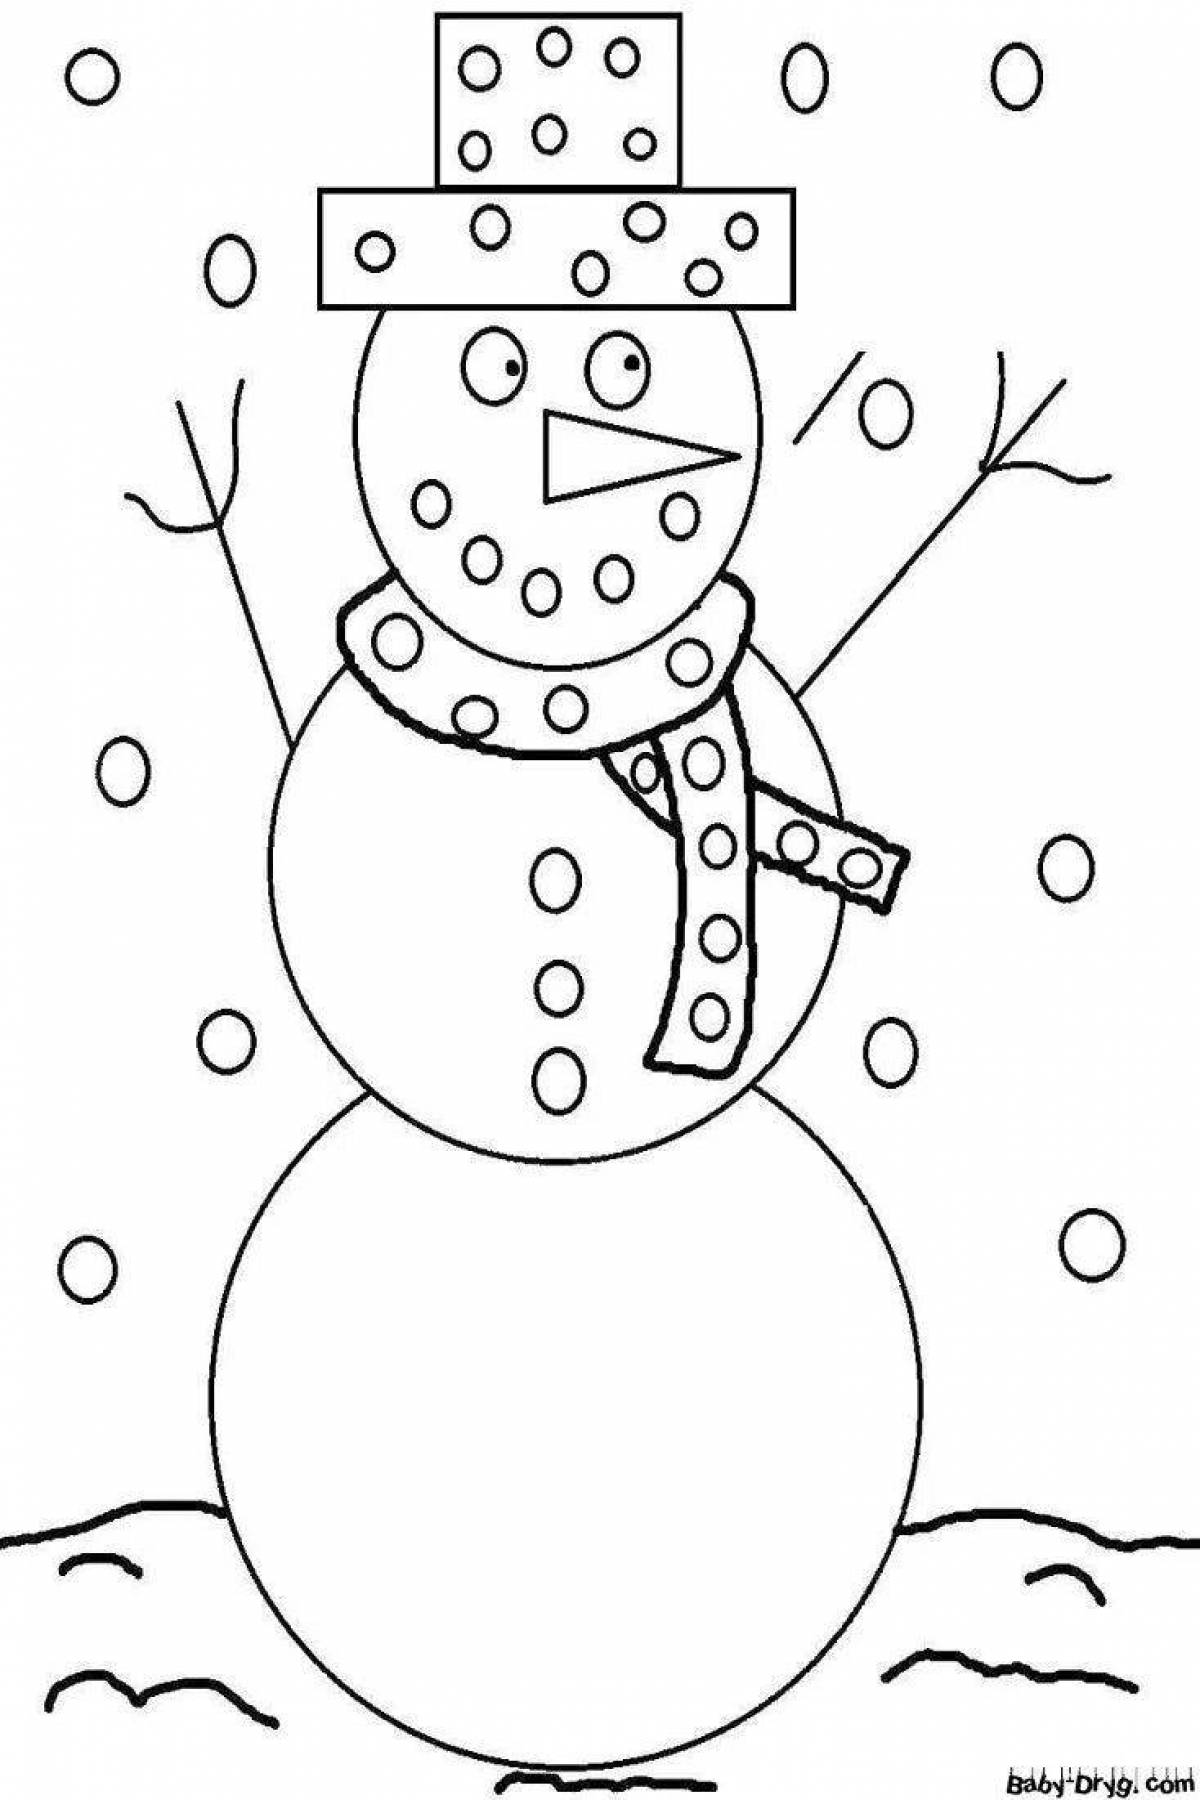 Colorful snowman coloring book for kids 2 3